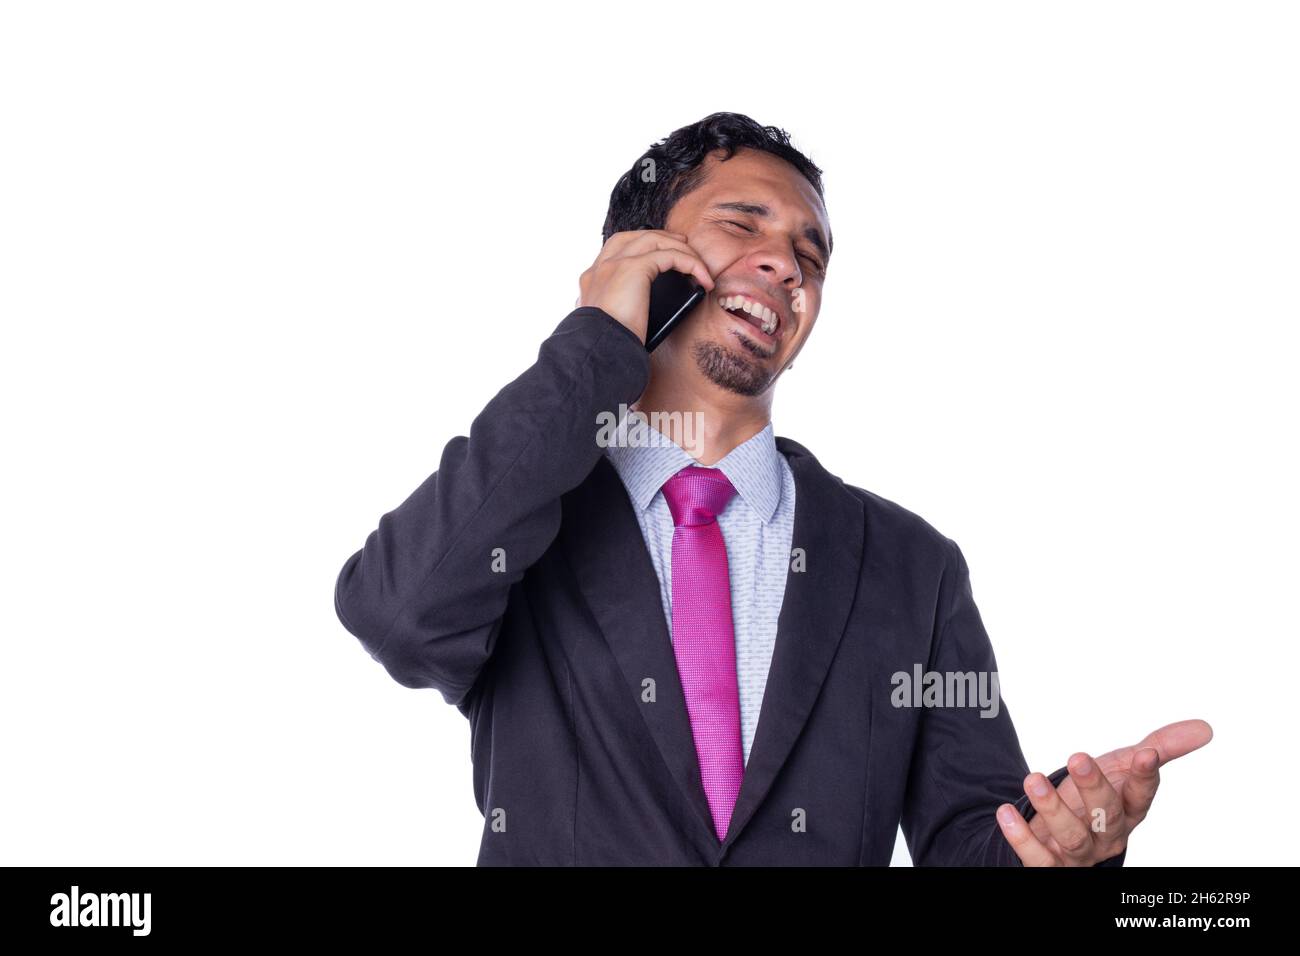 Businessman laughs while talking on the phone. Young adult using a smart phone. Concept of expressions of an entrepreneur. Person using technology Stock Photo